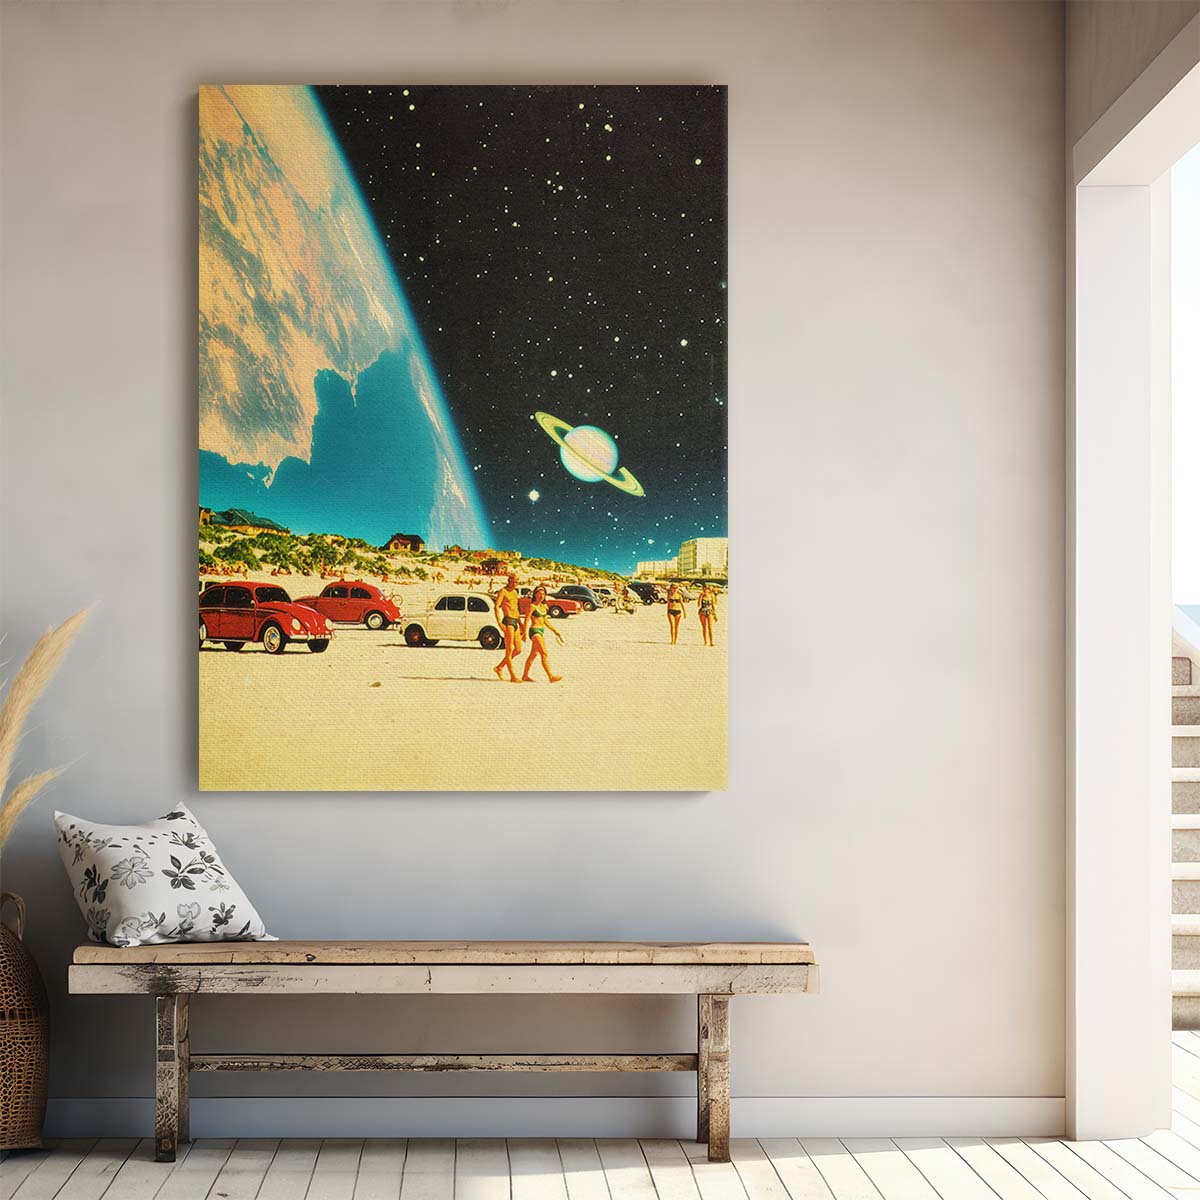 Contemporary Surreal Galaxy Beach Collage Art, Retro Futuristic Space Illustration by Luxuriance Designs, made in USA